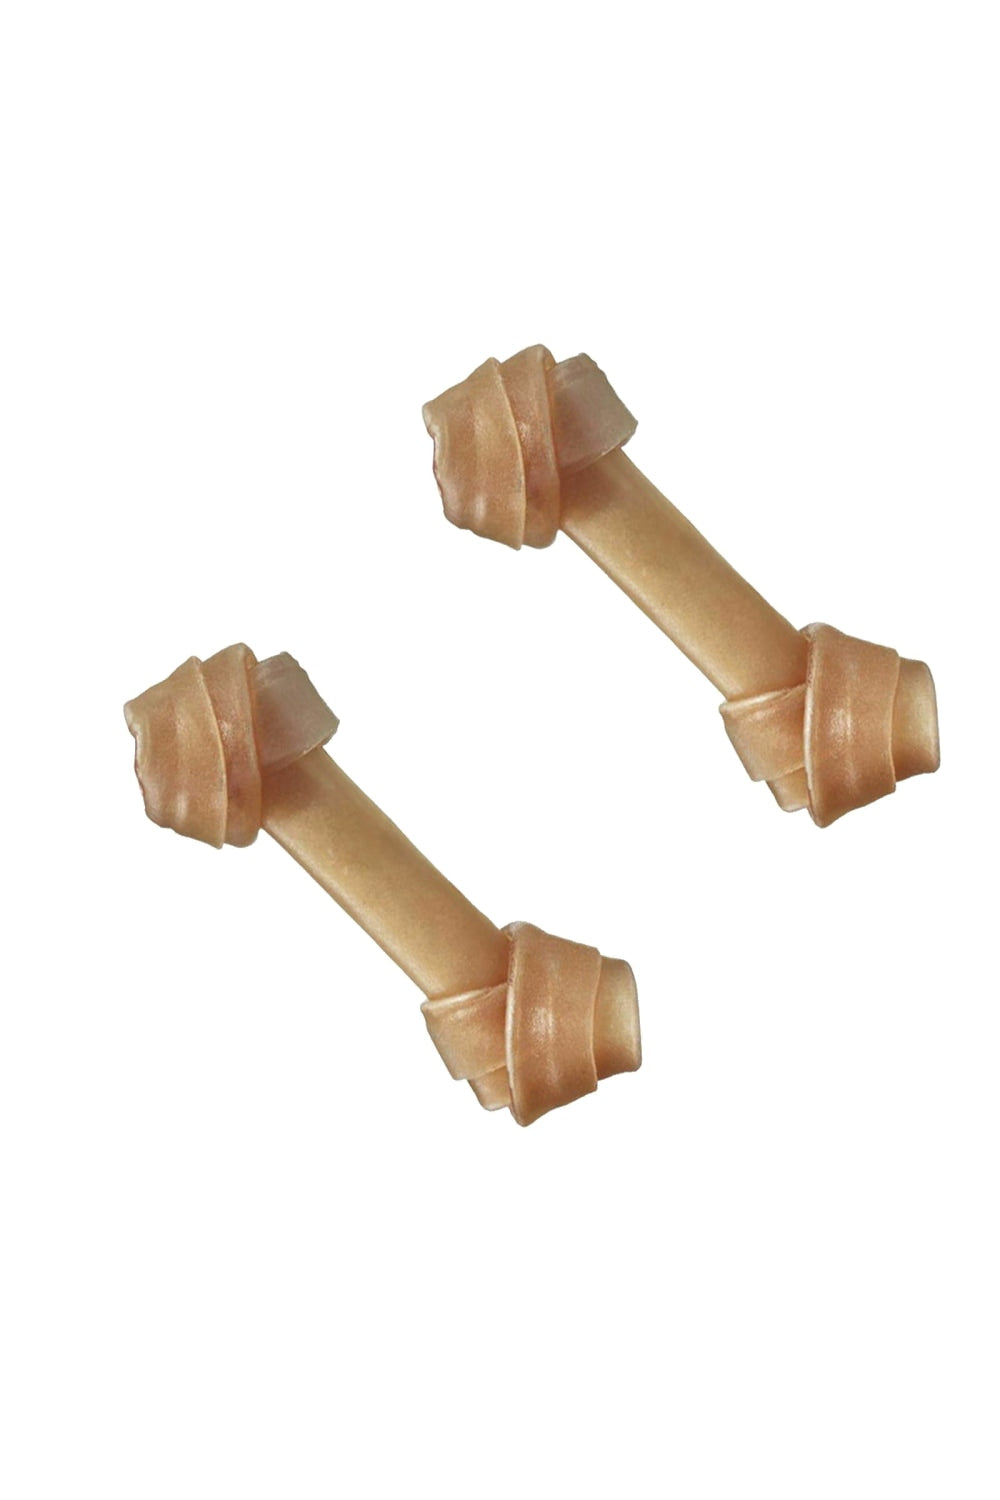 PPI Rawhide Chew Knot Dog treat (Pack Of 10) (Rawhide) (One Size)